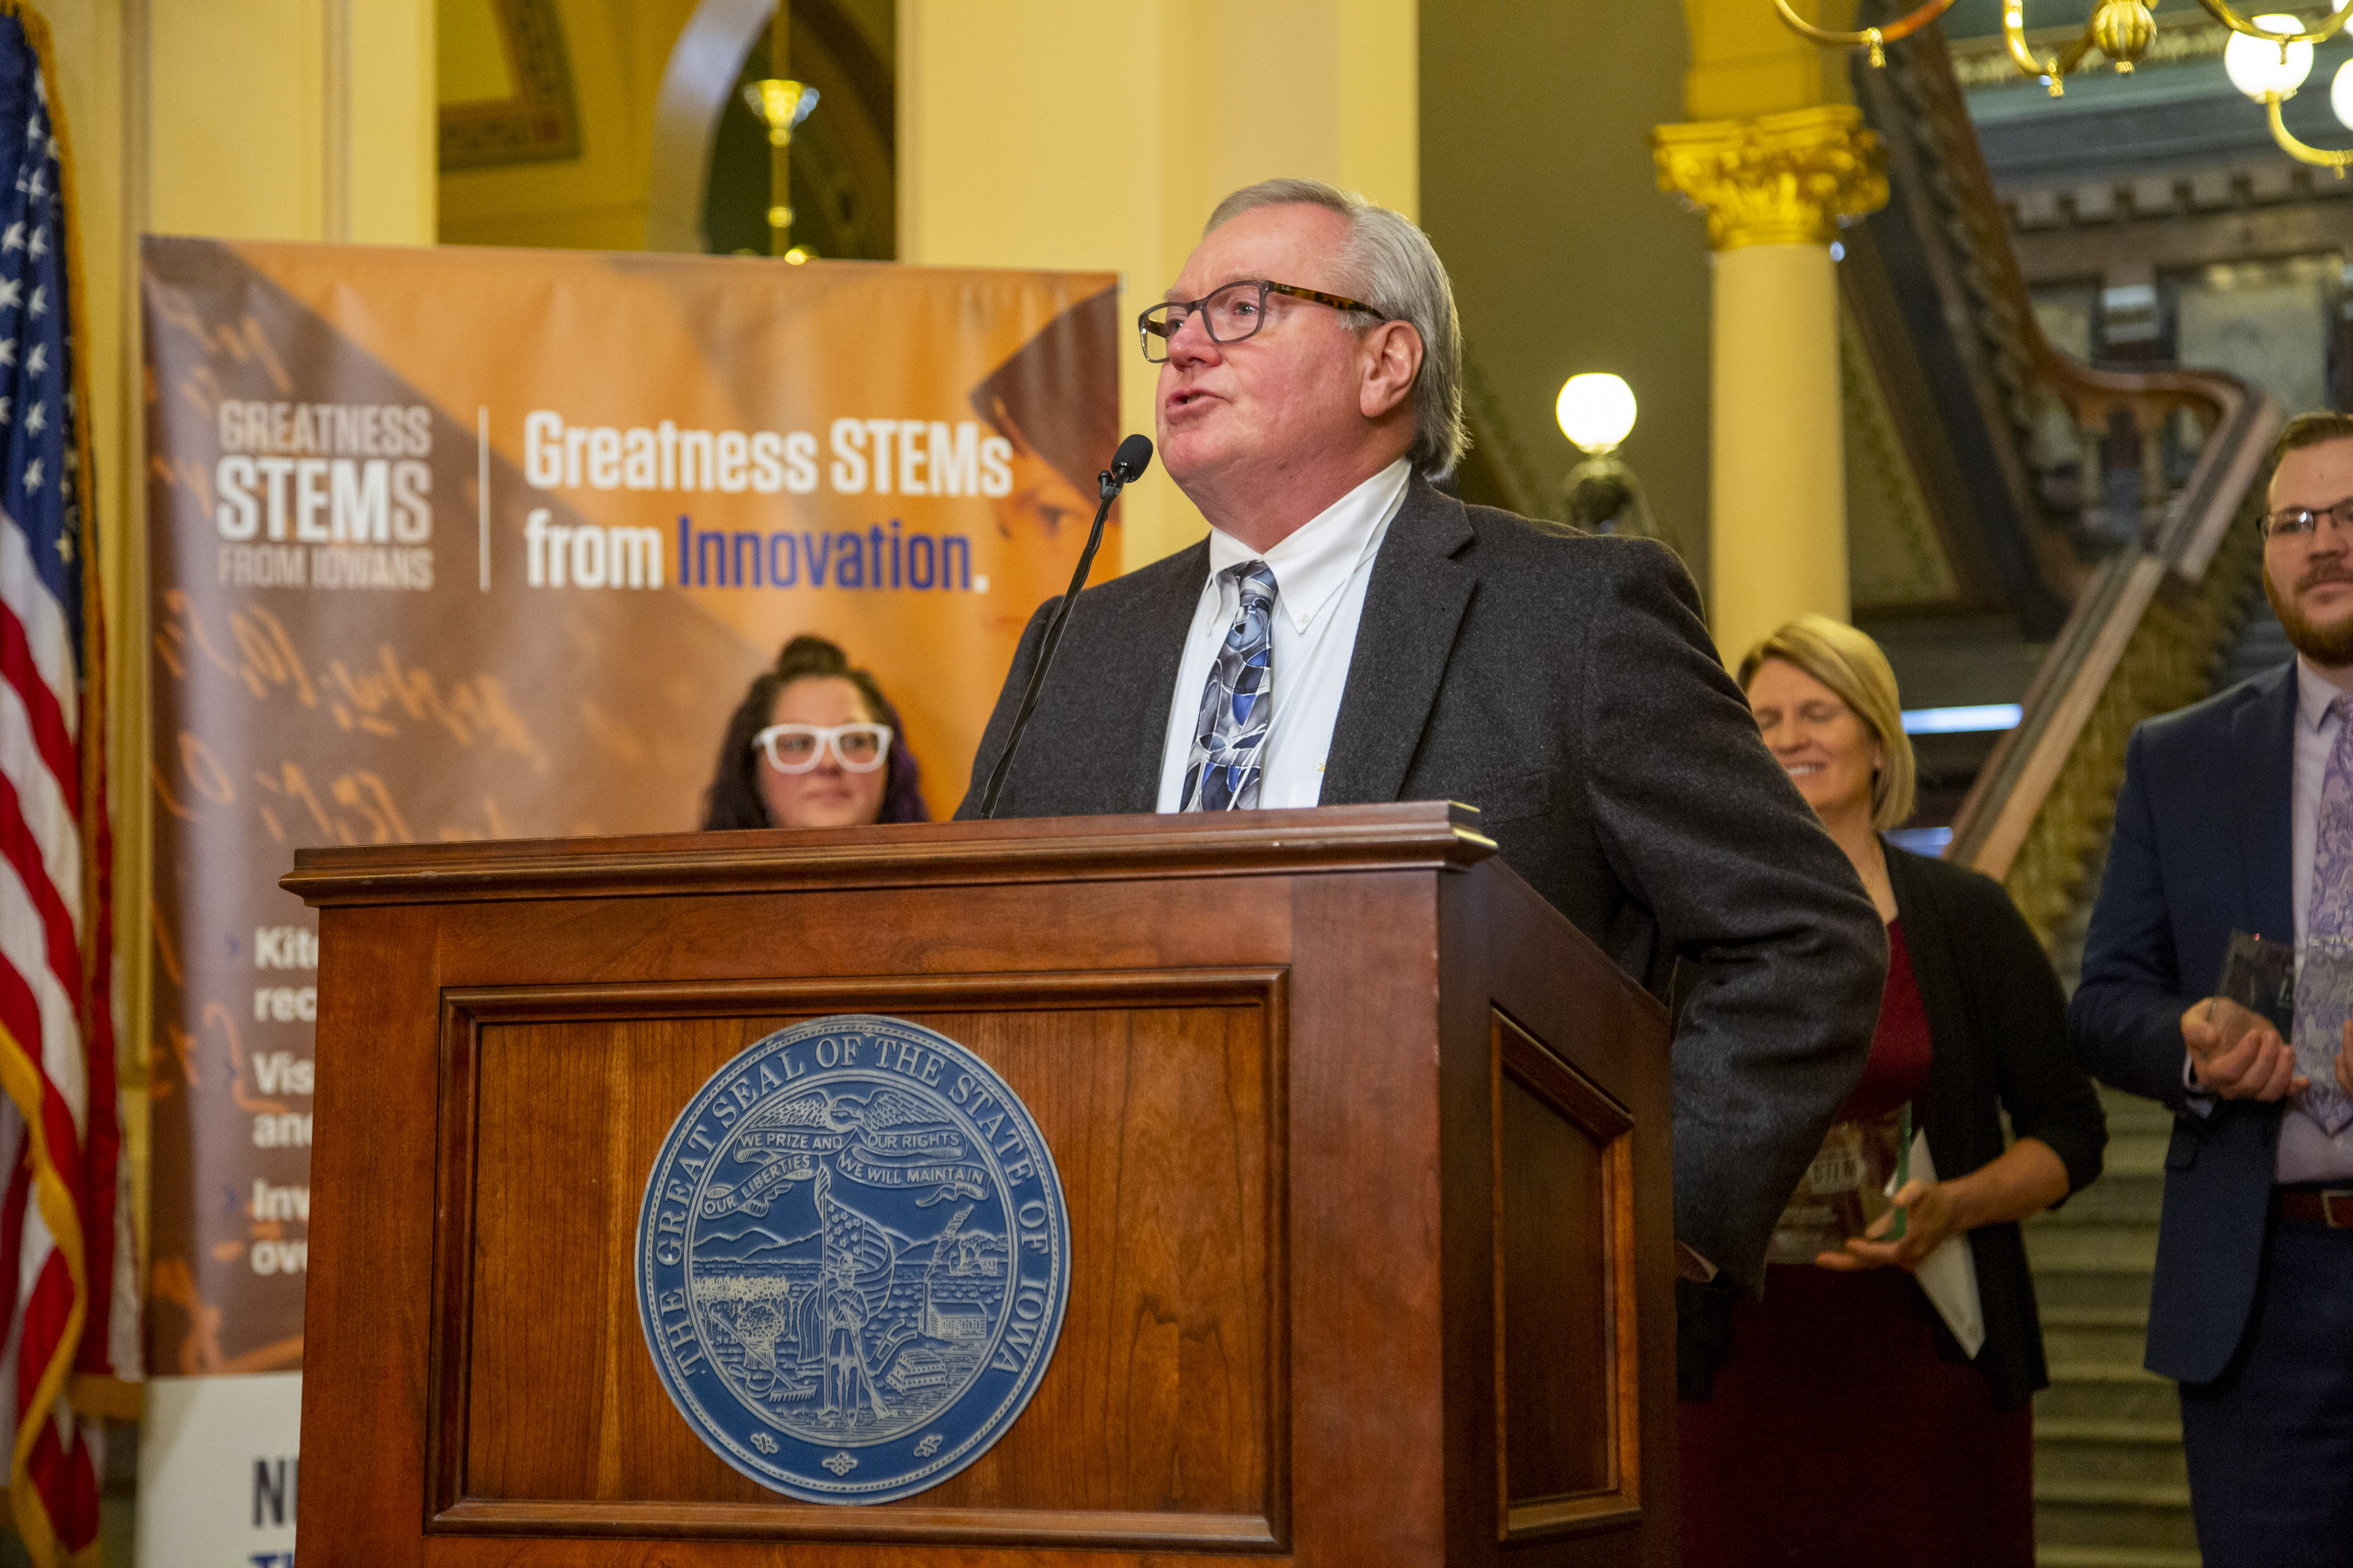 Roger Hargens’ passion for STEM helped solidify bipartisan legislative support ﻿at STEM Day at the Capitol.